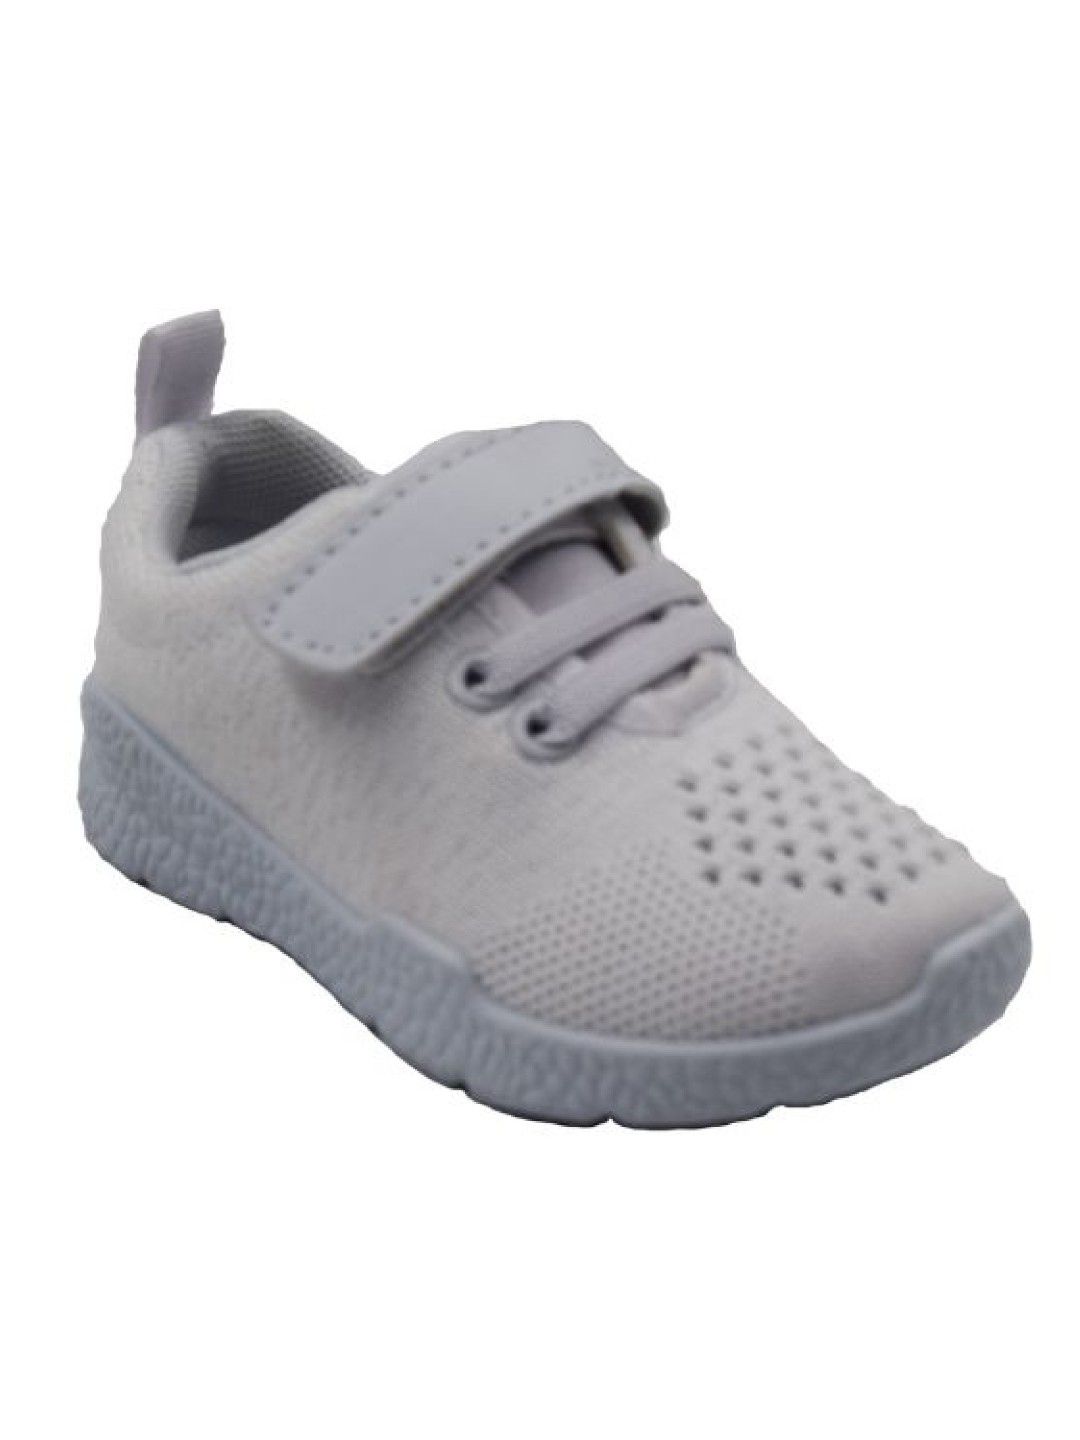 Enfant Light Sole Shoes with Beep Beep Sound